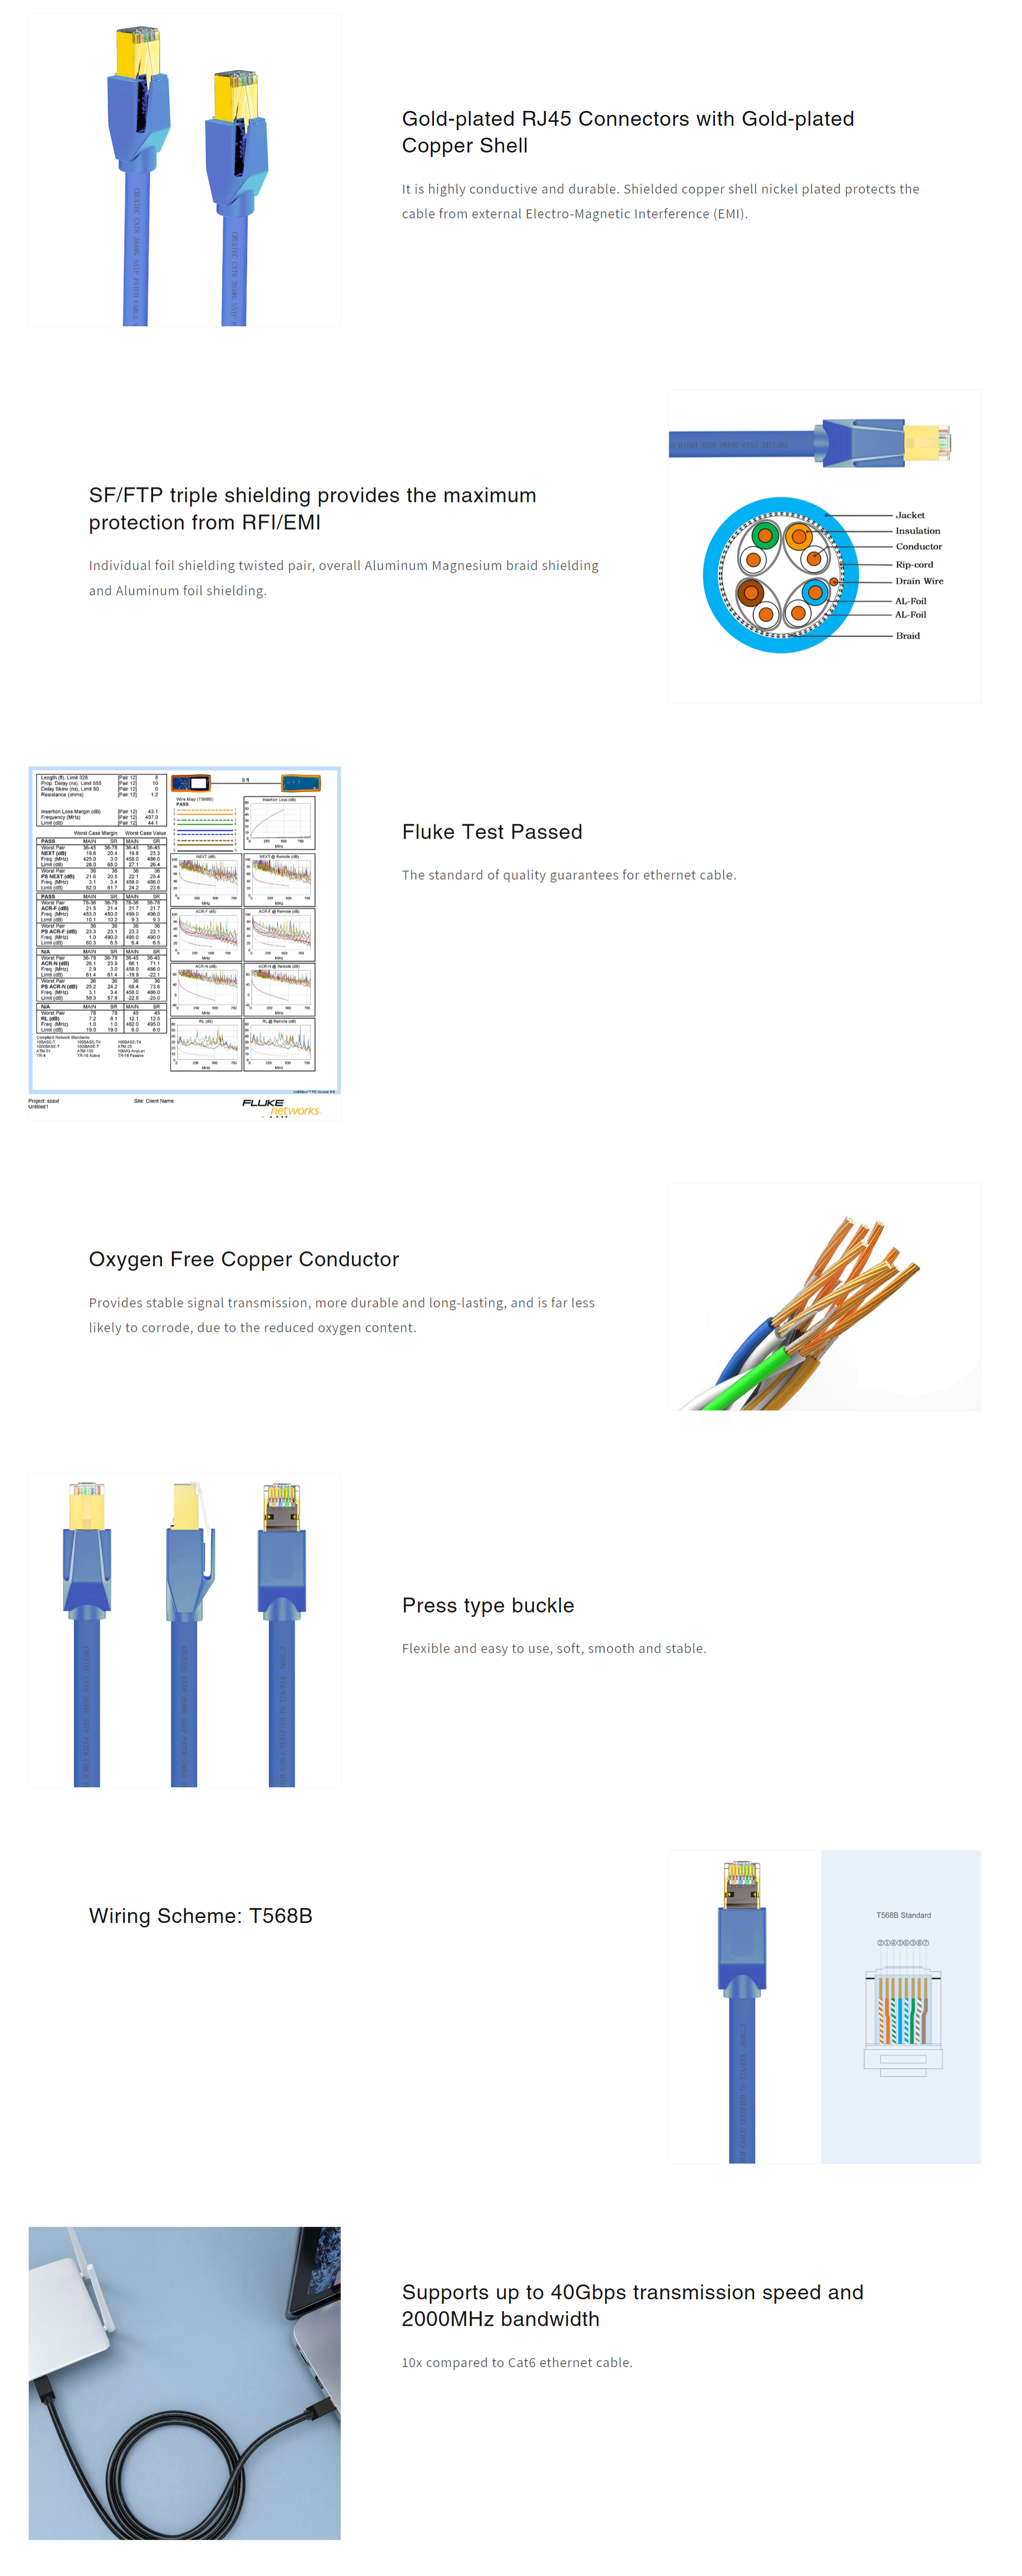 A large marketing image providing additional information about the product Cruxtec CAT8 0.5m 40GbE SF/FTP Triple Shielding Ethernet Cable Blue - Additional alt info not provided